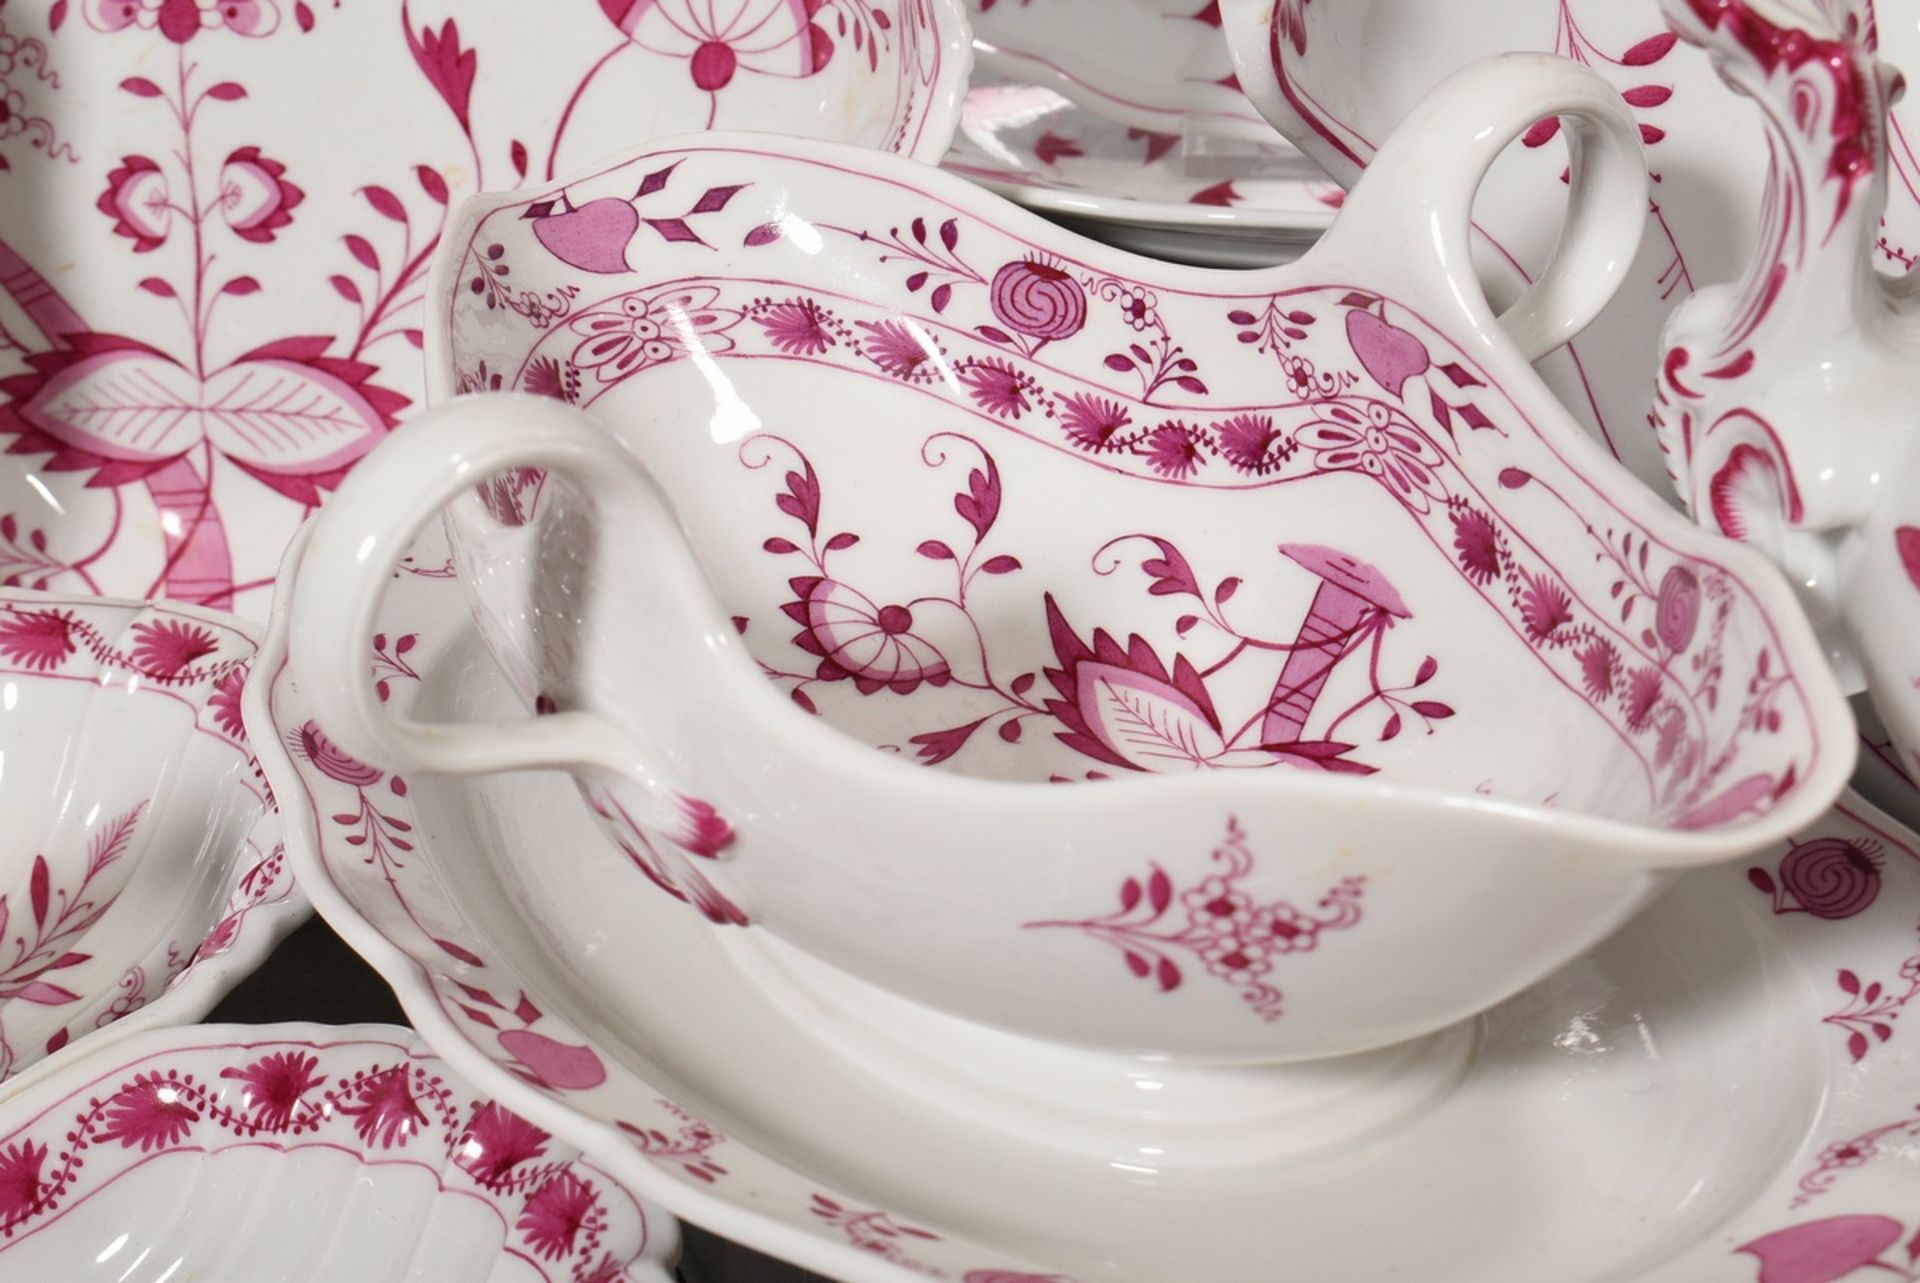 65 Pieces rare Meissen dinner service "Zwiebelmuster Pink", custom made around 1900, consisting of: - Image 15 of 27